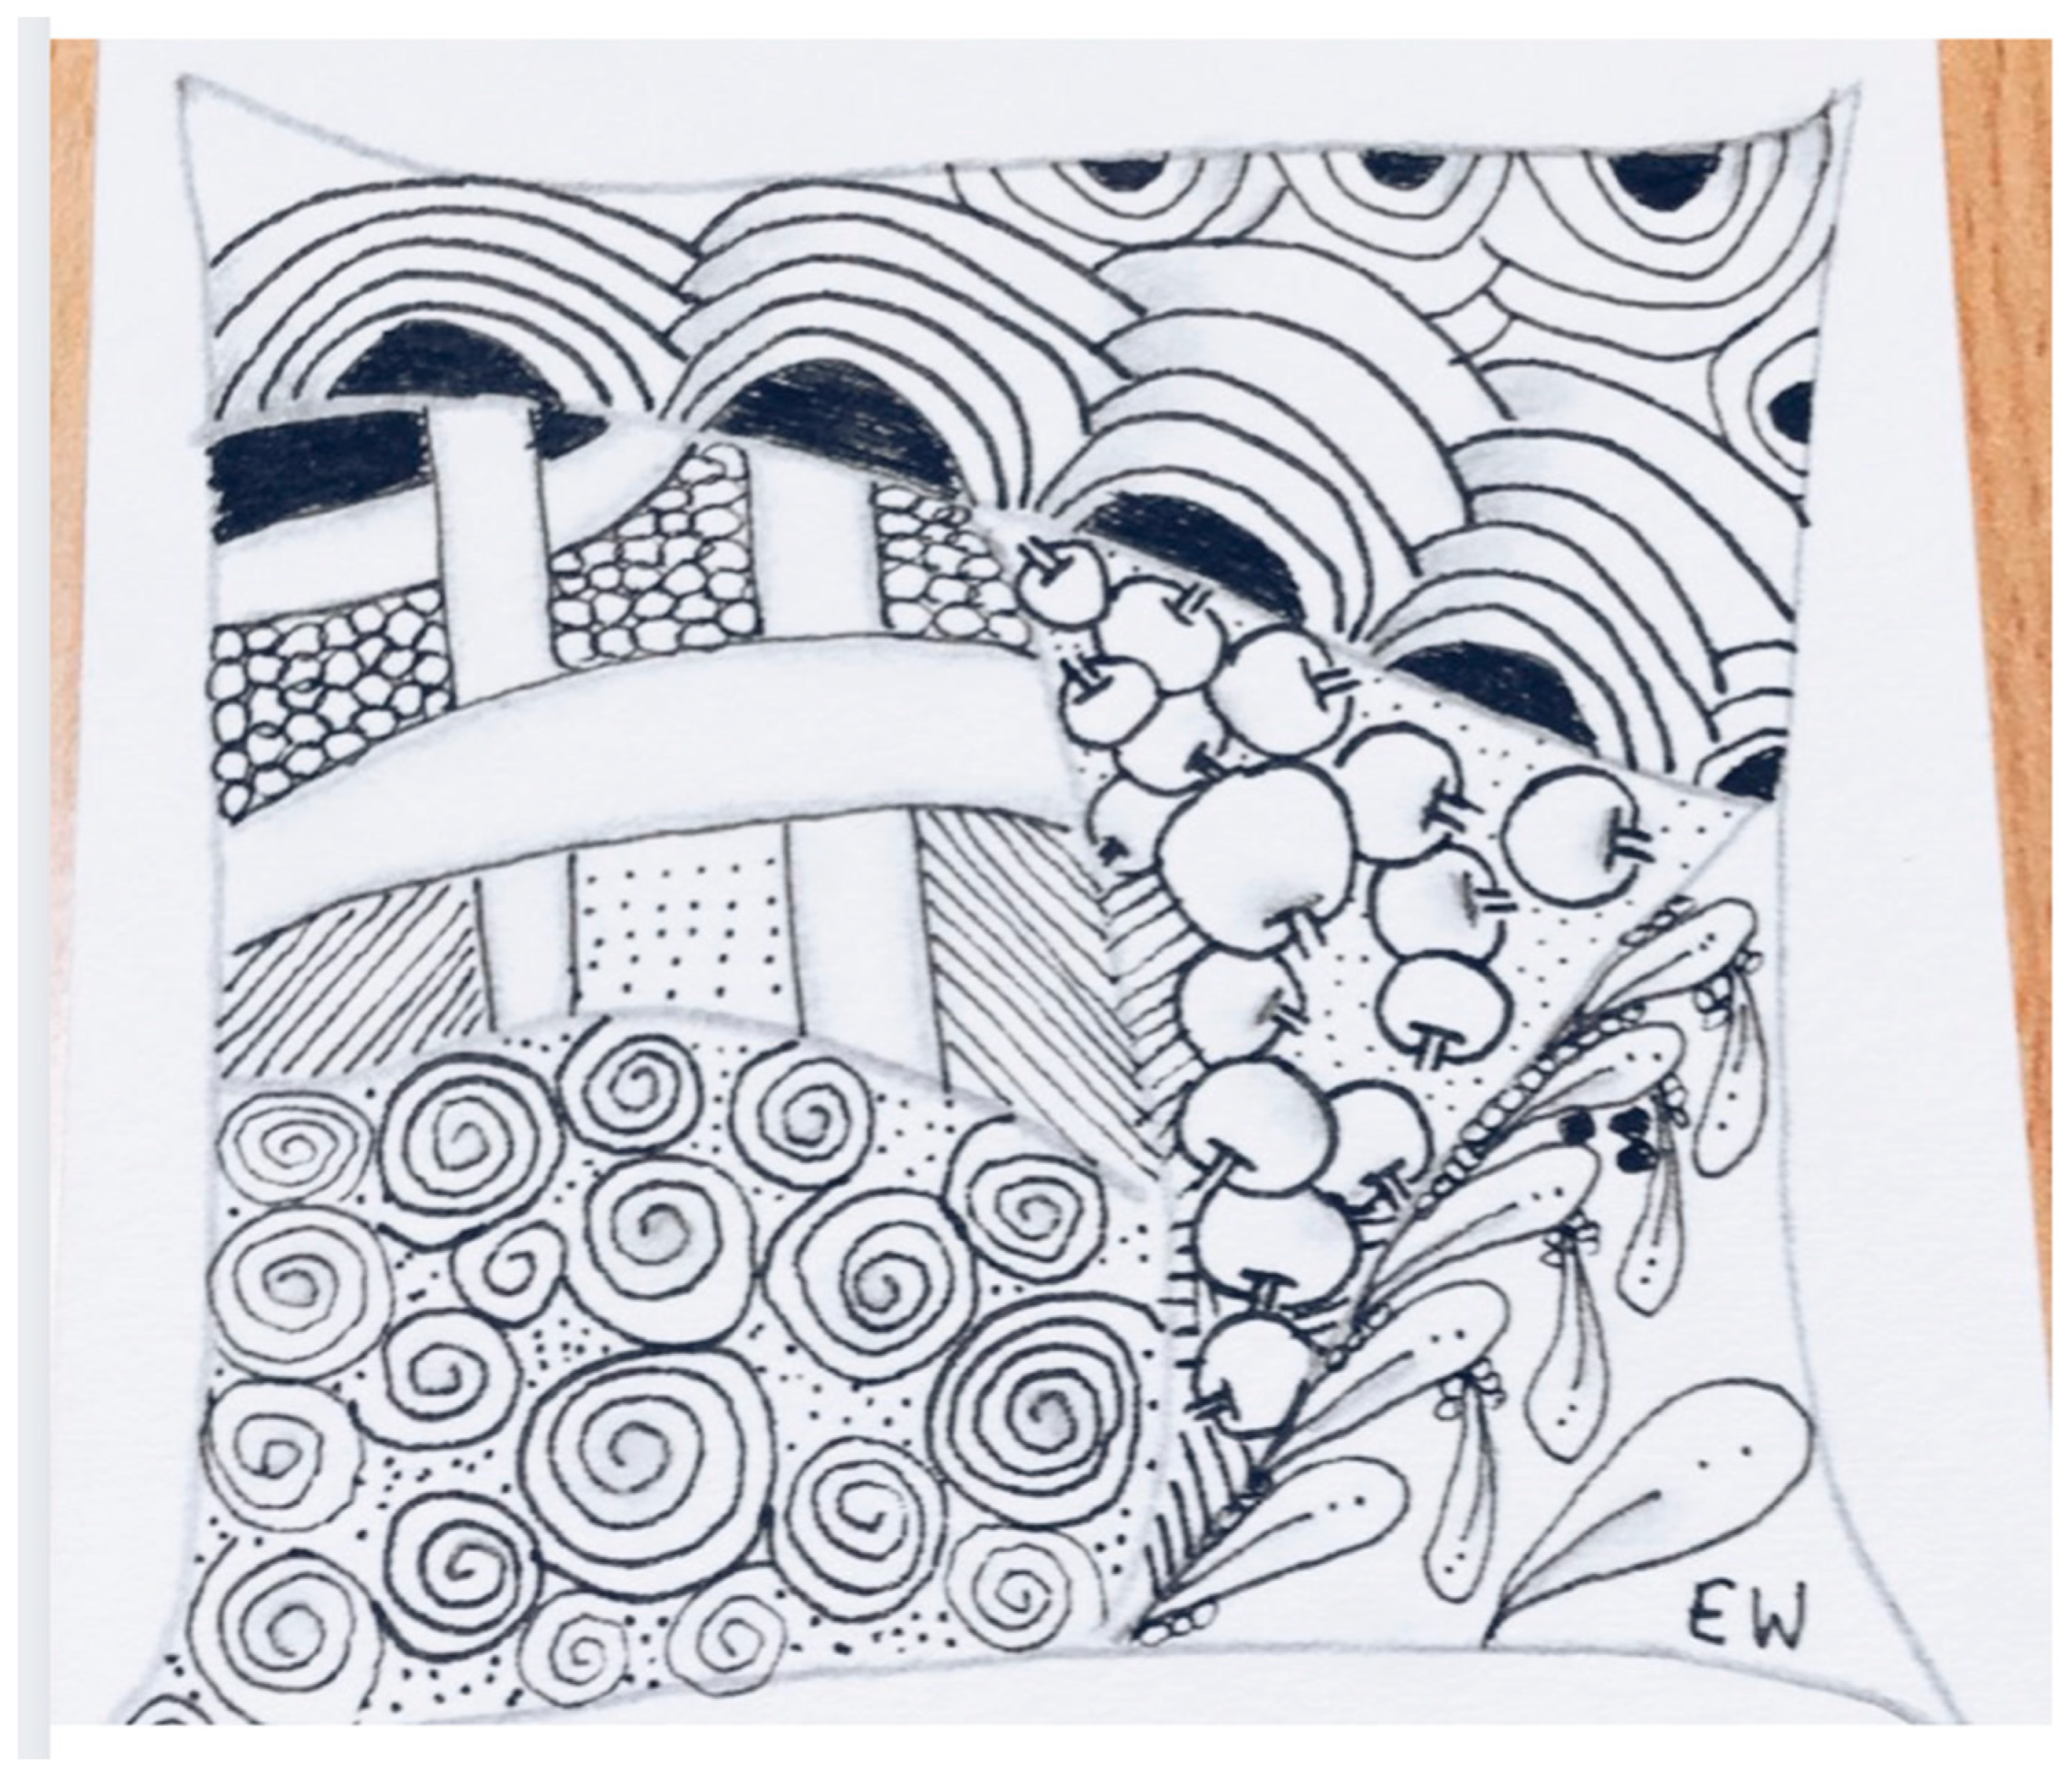 Zentangle Drawing Templates for Practice and Art Therapy 4